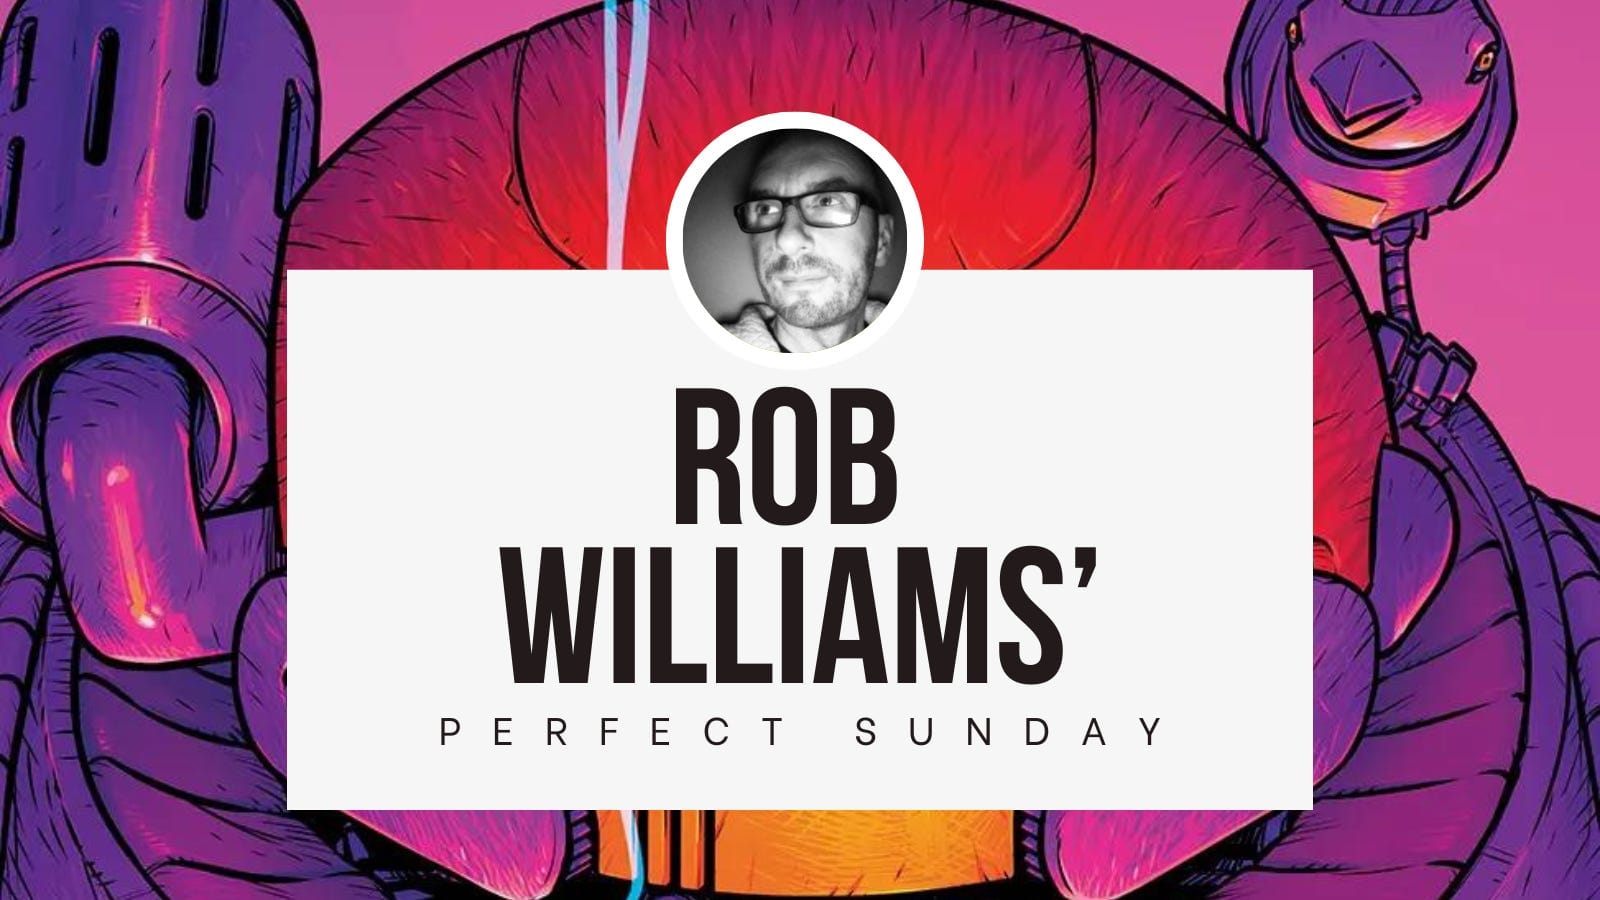 A perfect Sunday with... Rob Williams